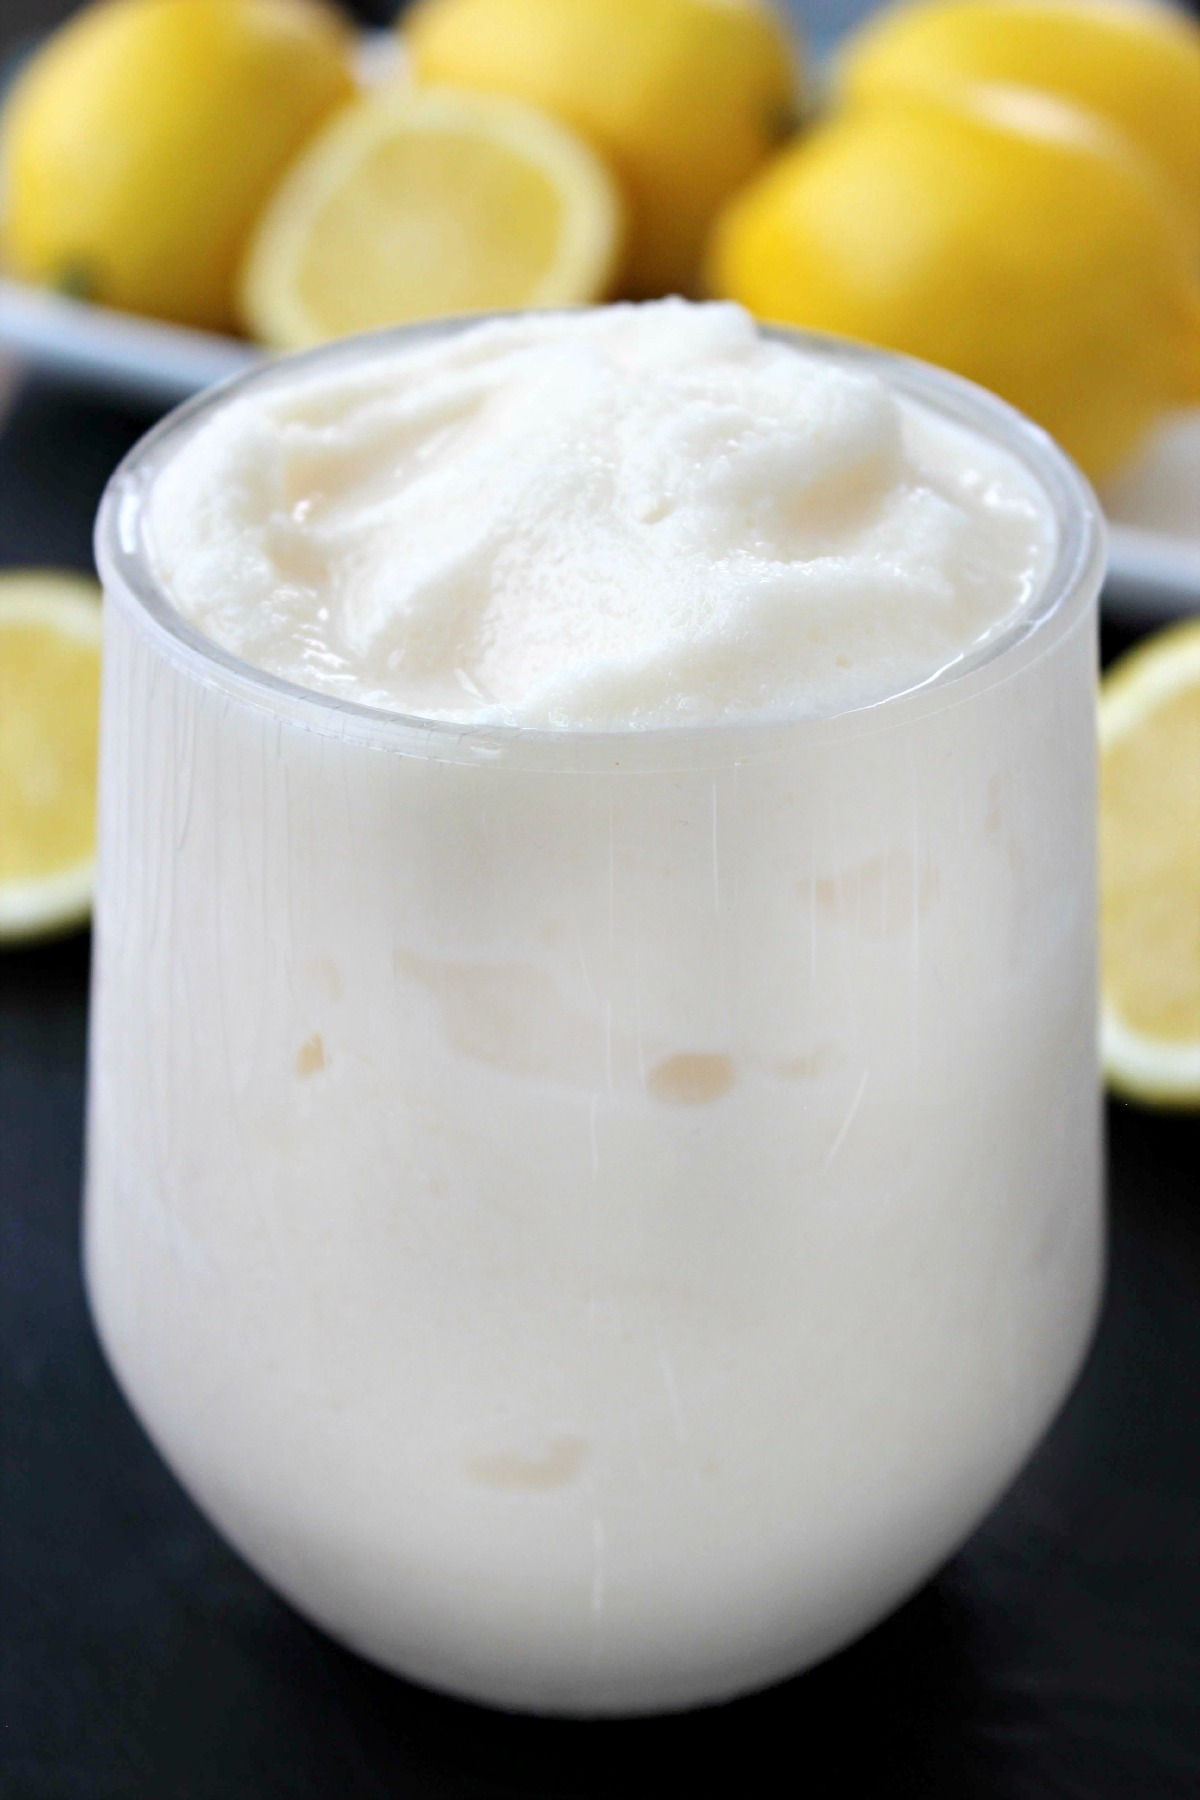 Chick-Fil-A Frosted Lemonade